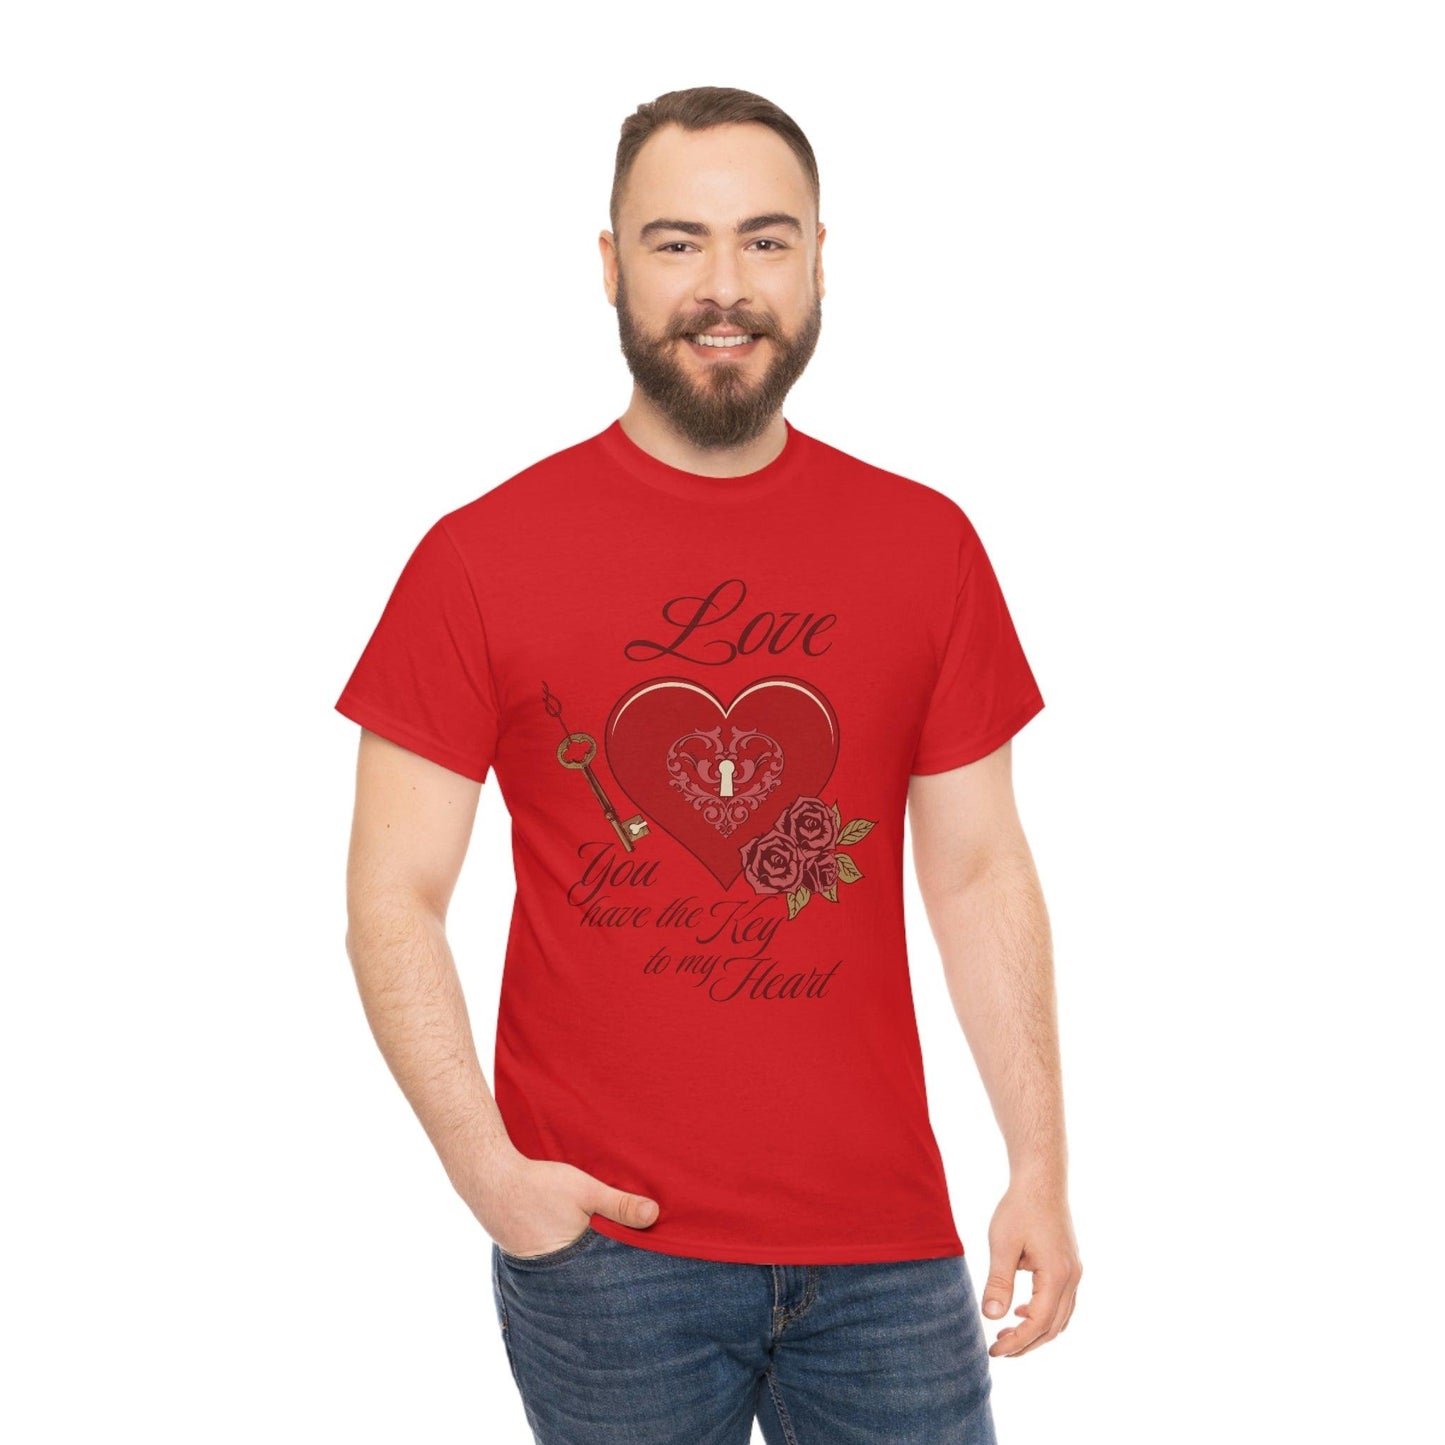 Love you have the keys to my heart Tee - Giftsmojo